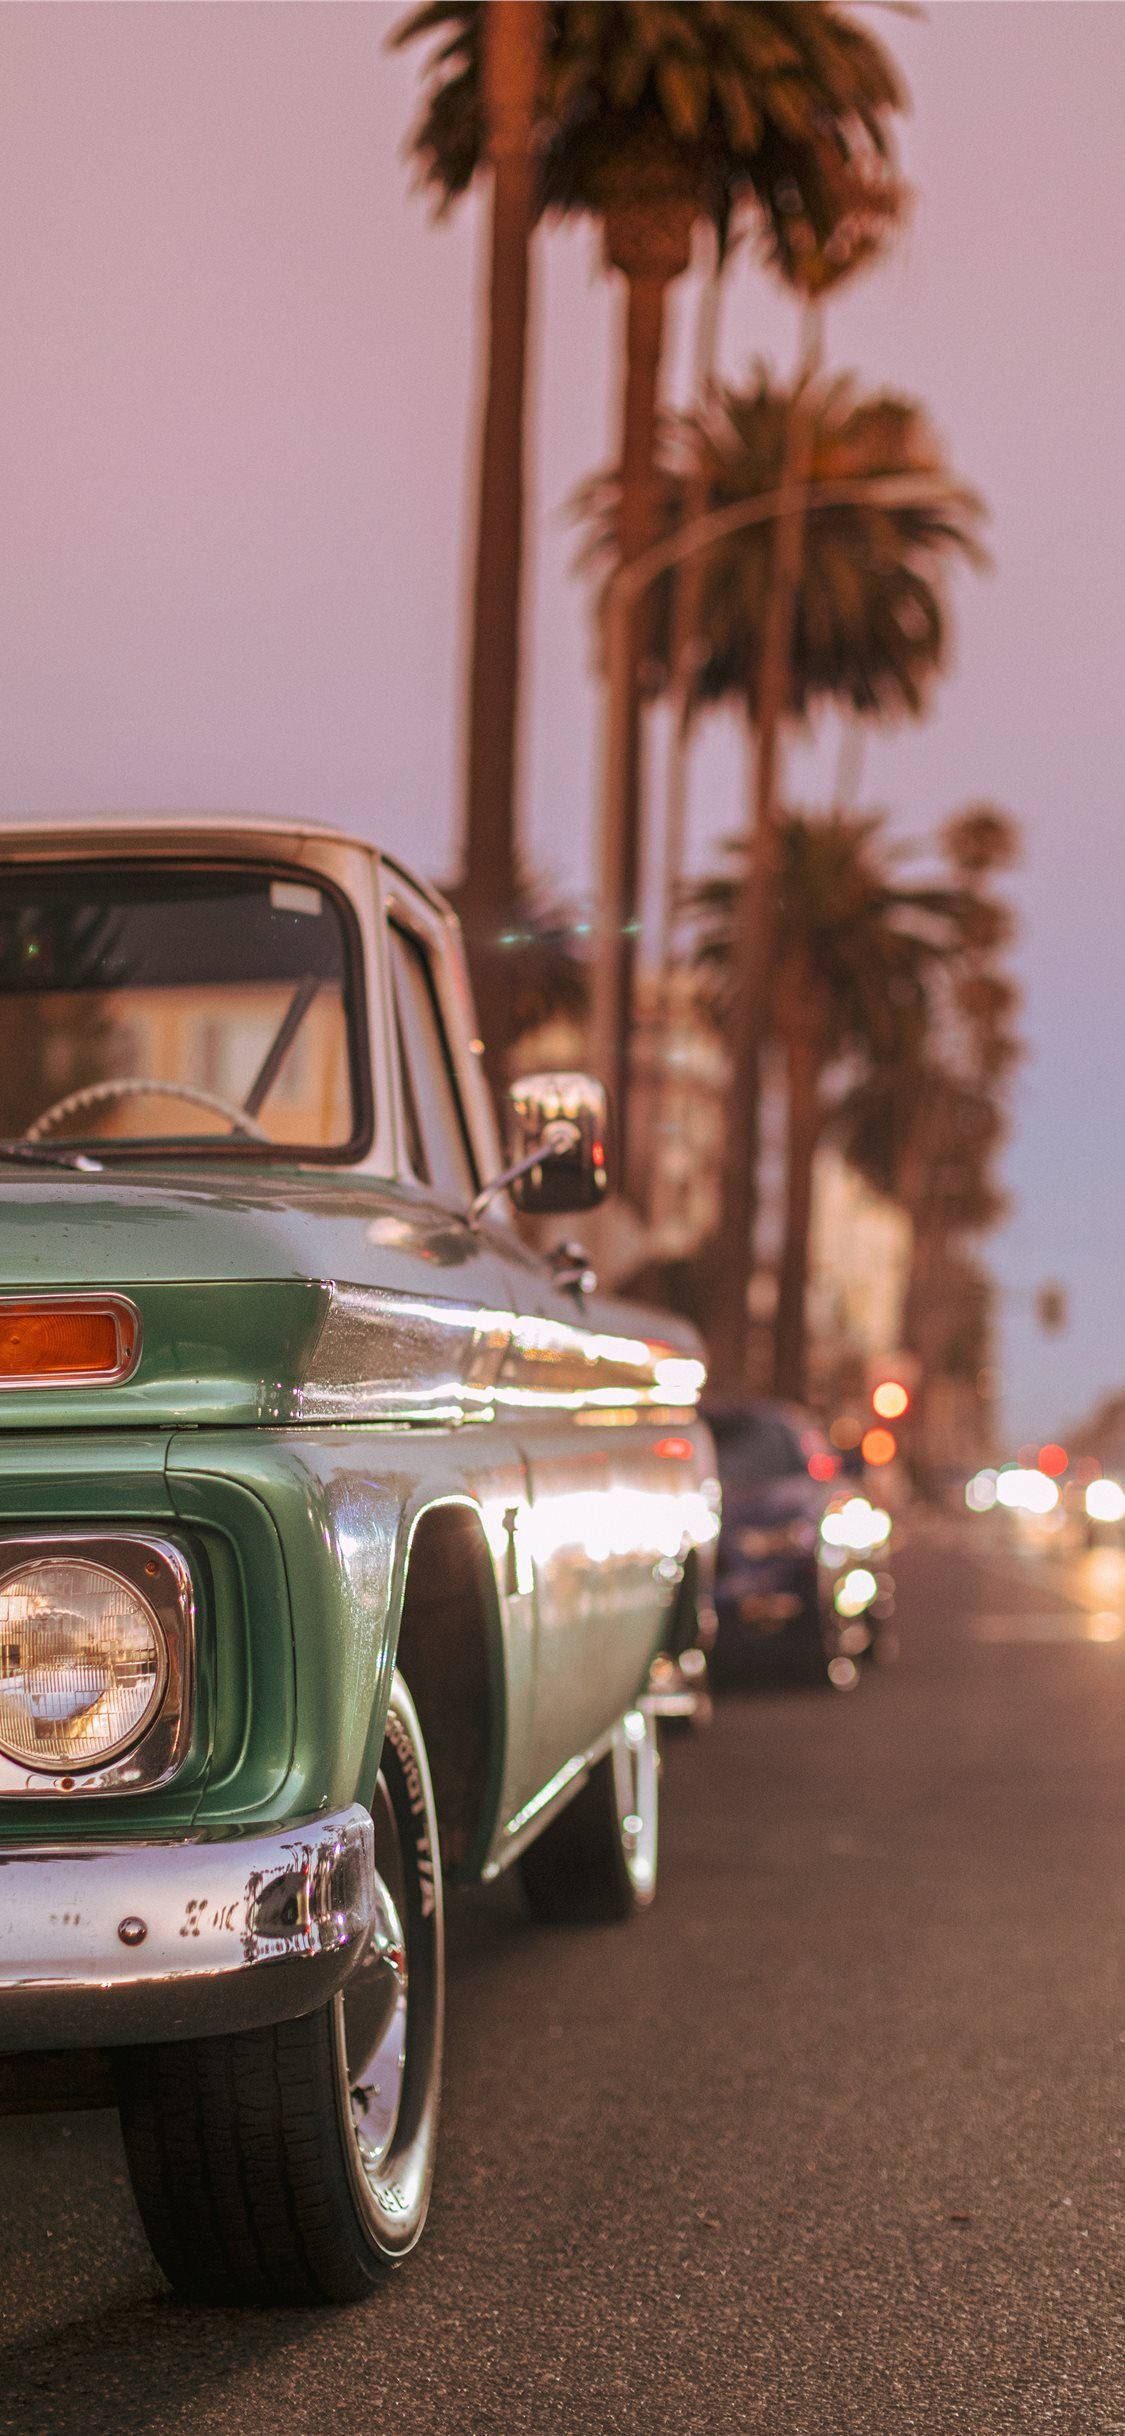 Vintage Car Parked By Palm Trees Wallpaper